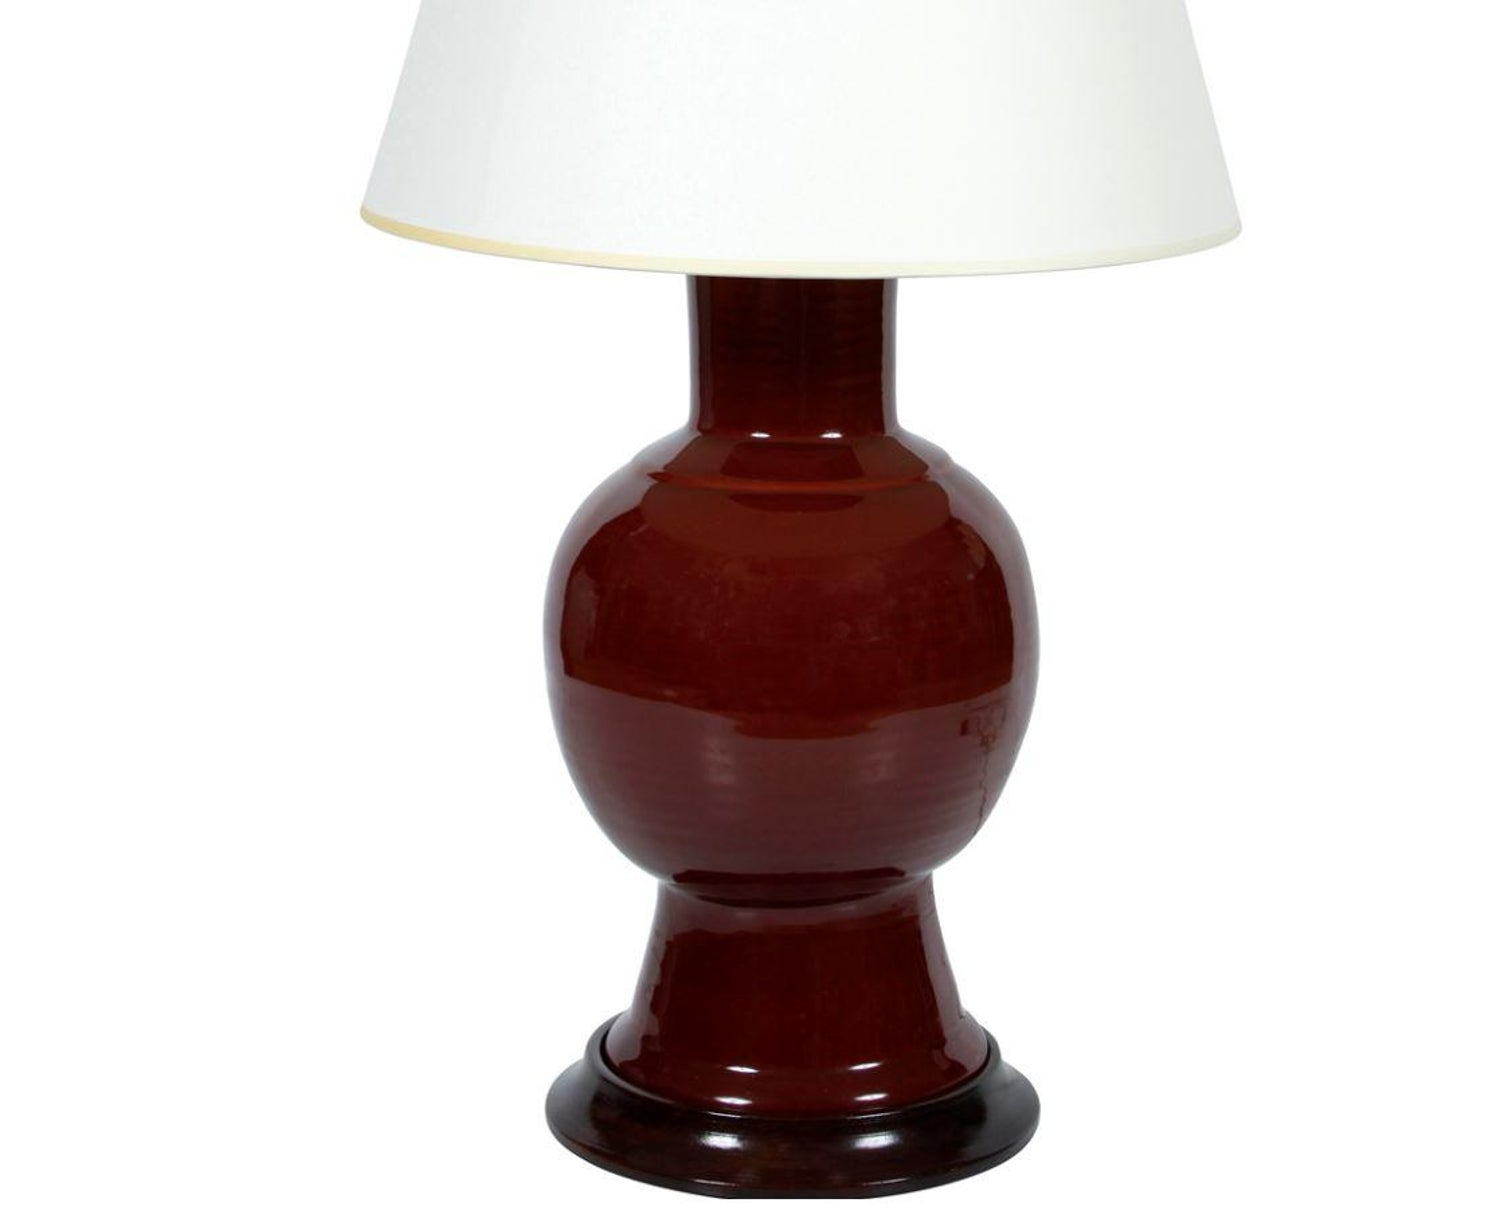 Christopher Spitzmiller Lamp With Wood, Christopher Spitzmiller Lamp 1stdibs